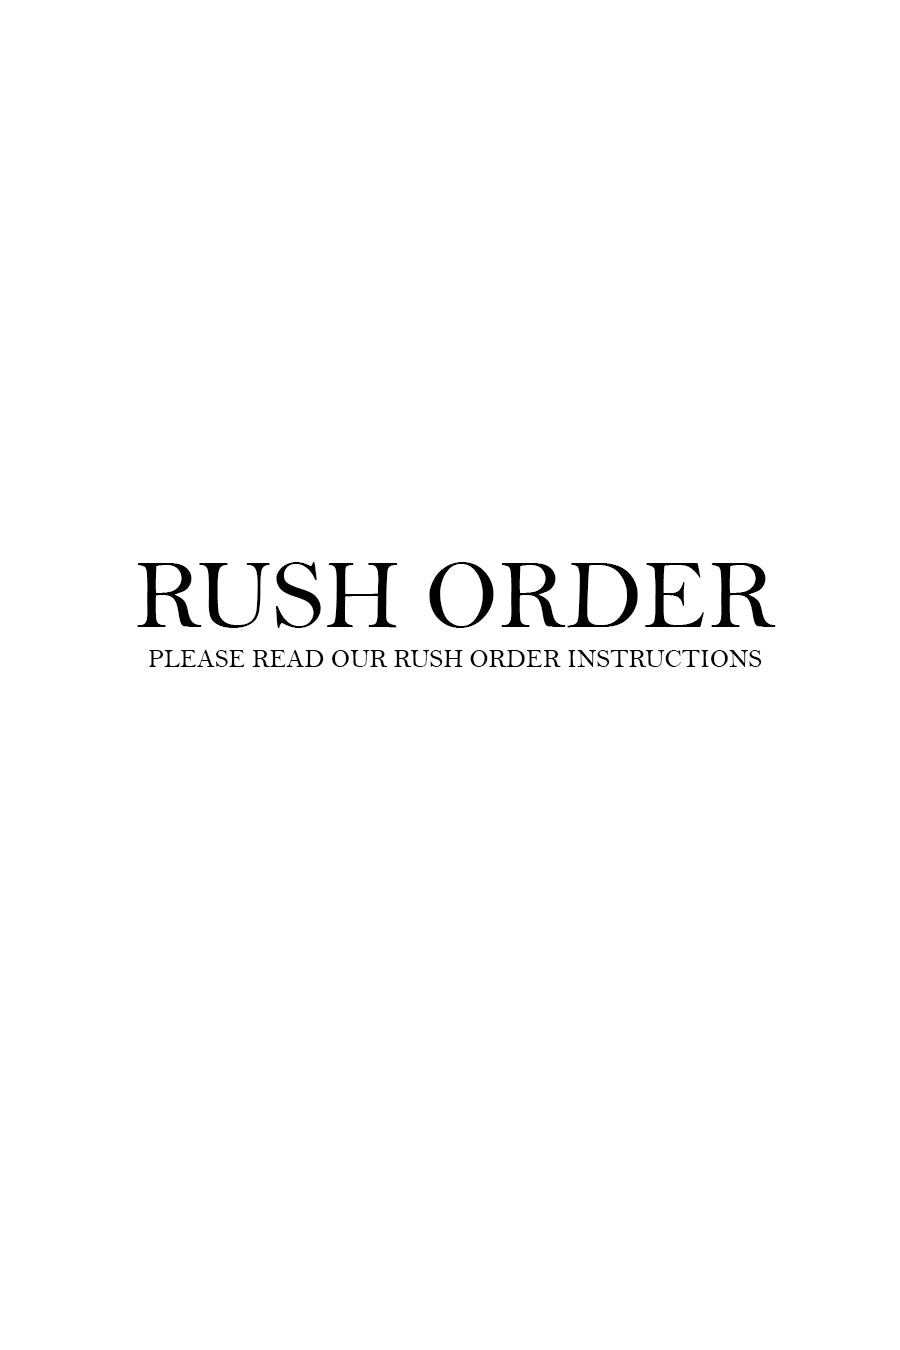 MADE TO ORDER RUSH FEE